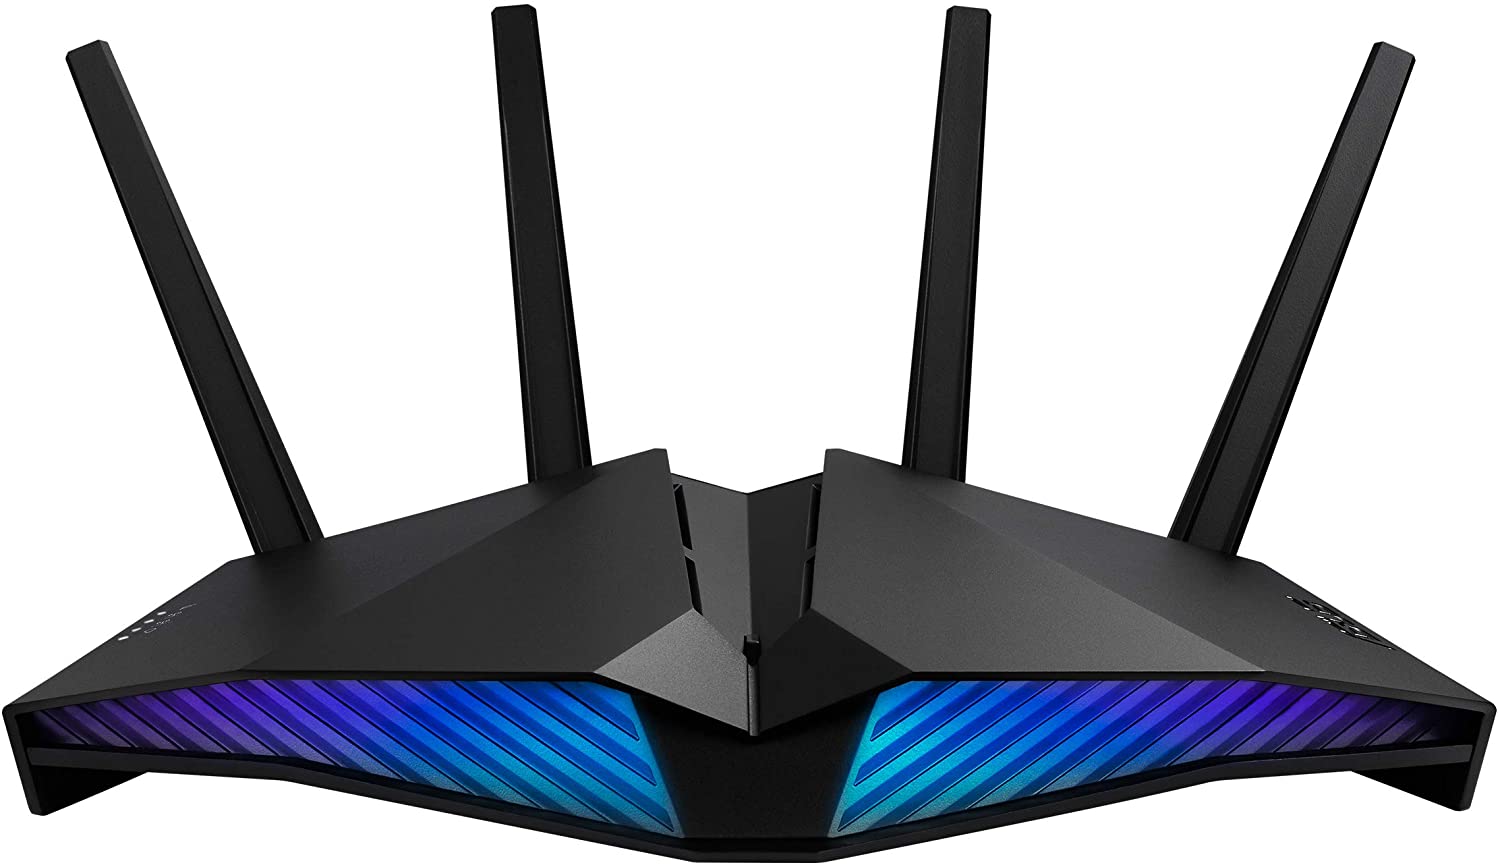 asus router admin